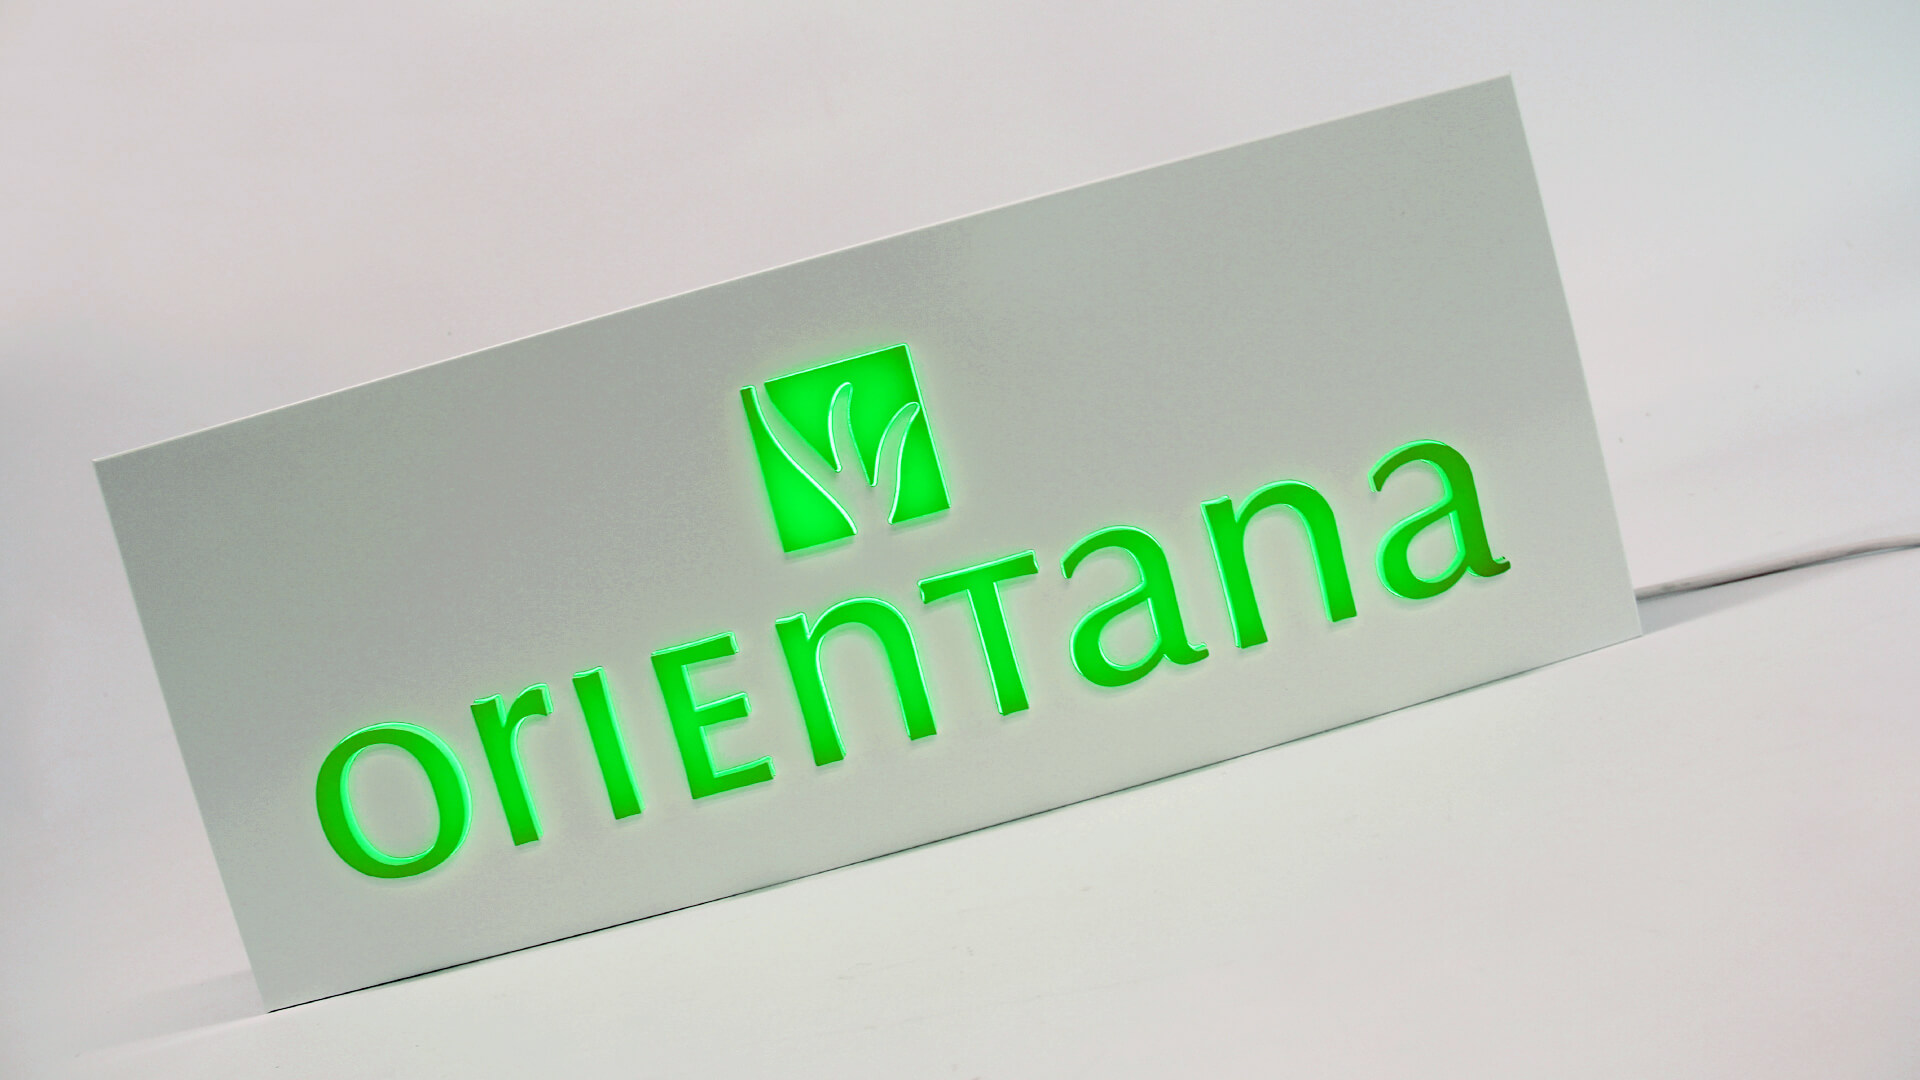 Orientana - coffer, advertising plafond, led, green in color